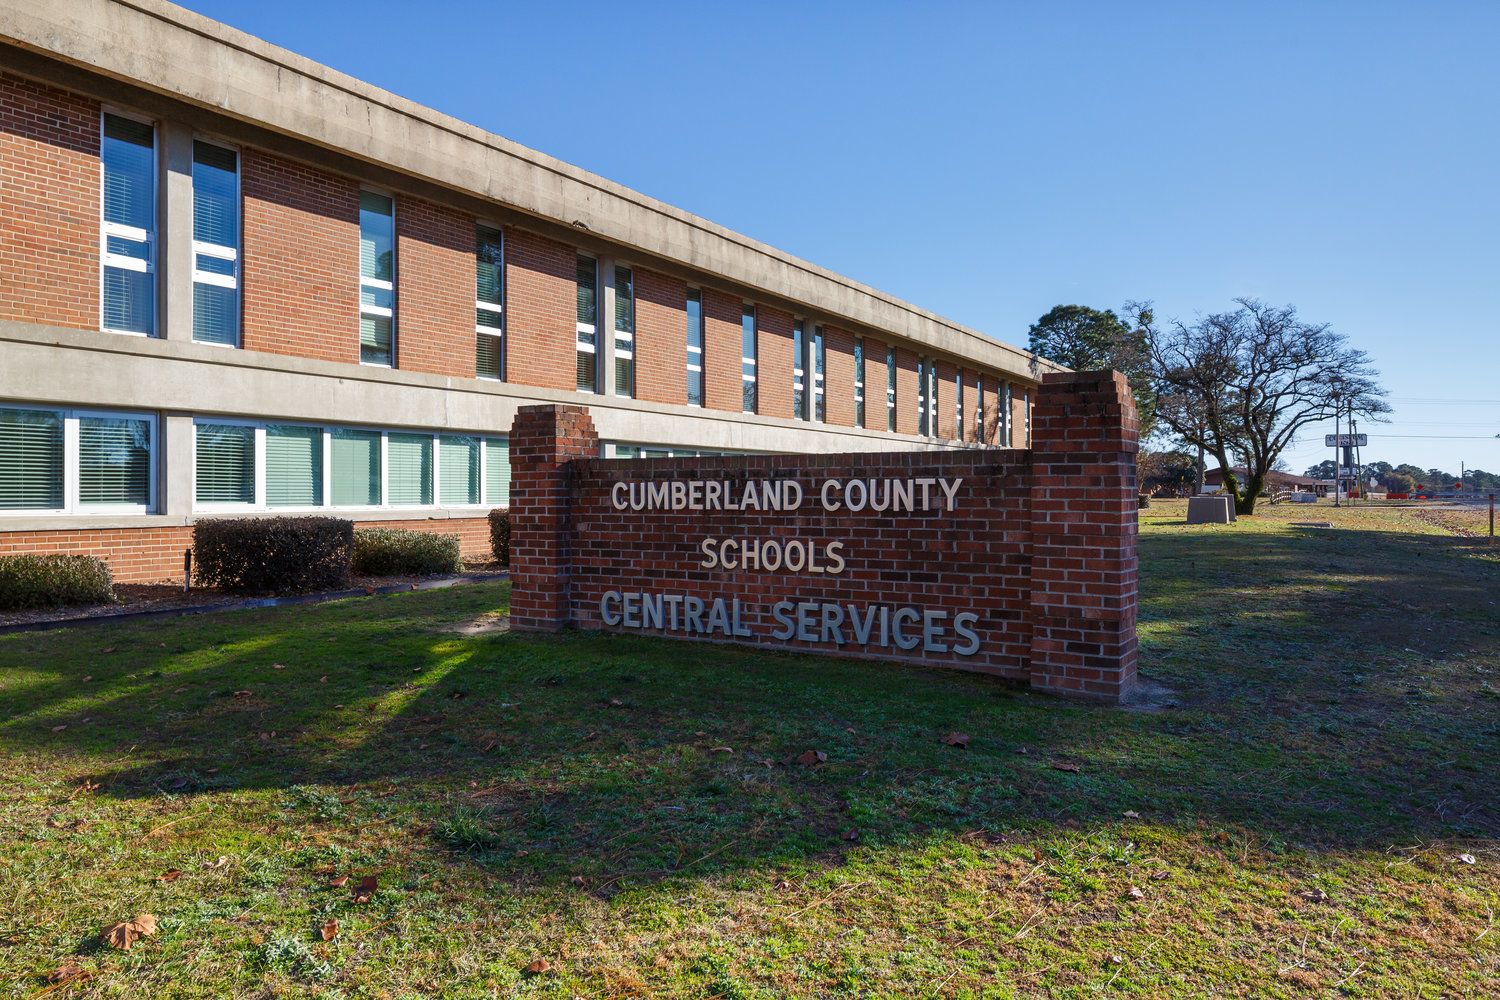 Cumberland County Schools offers from 34 Choice Programs at 28 different schools.